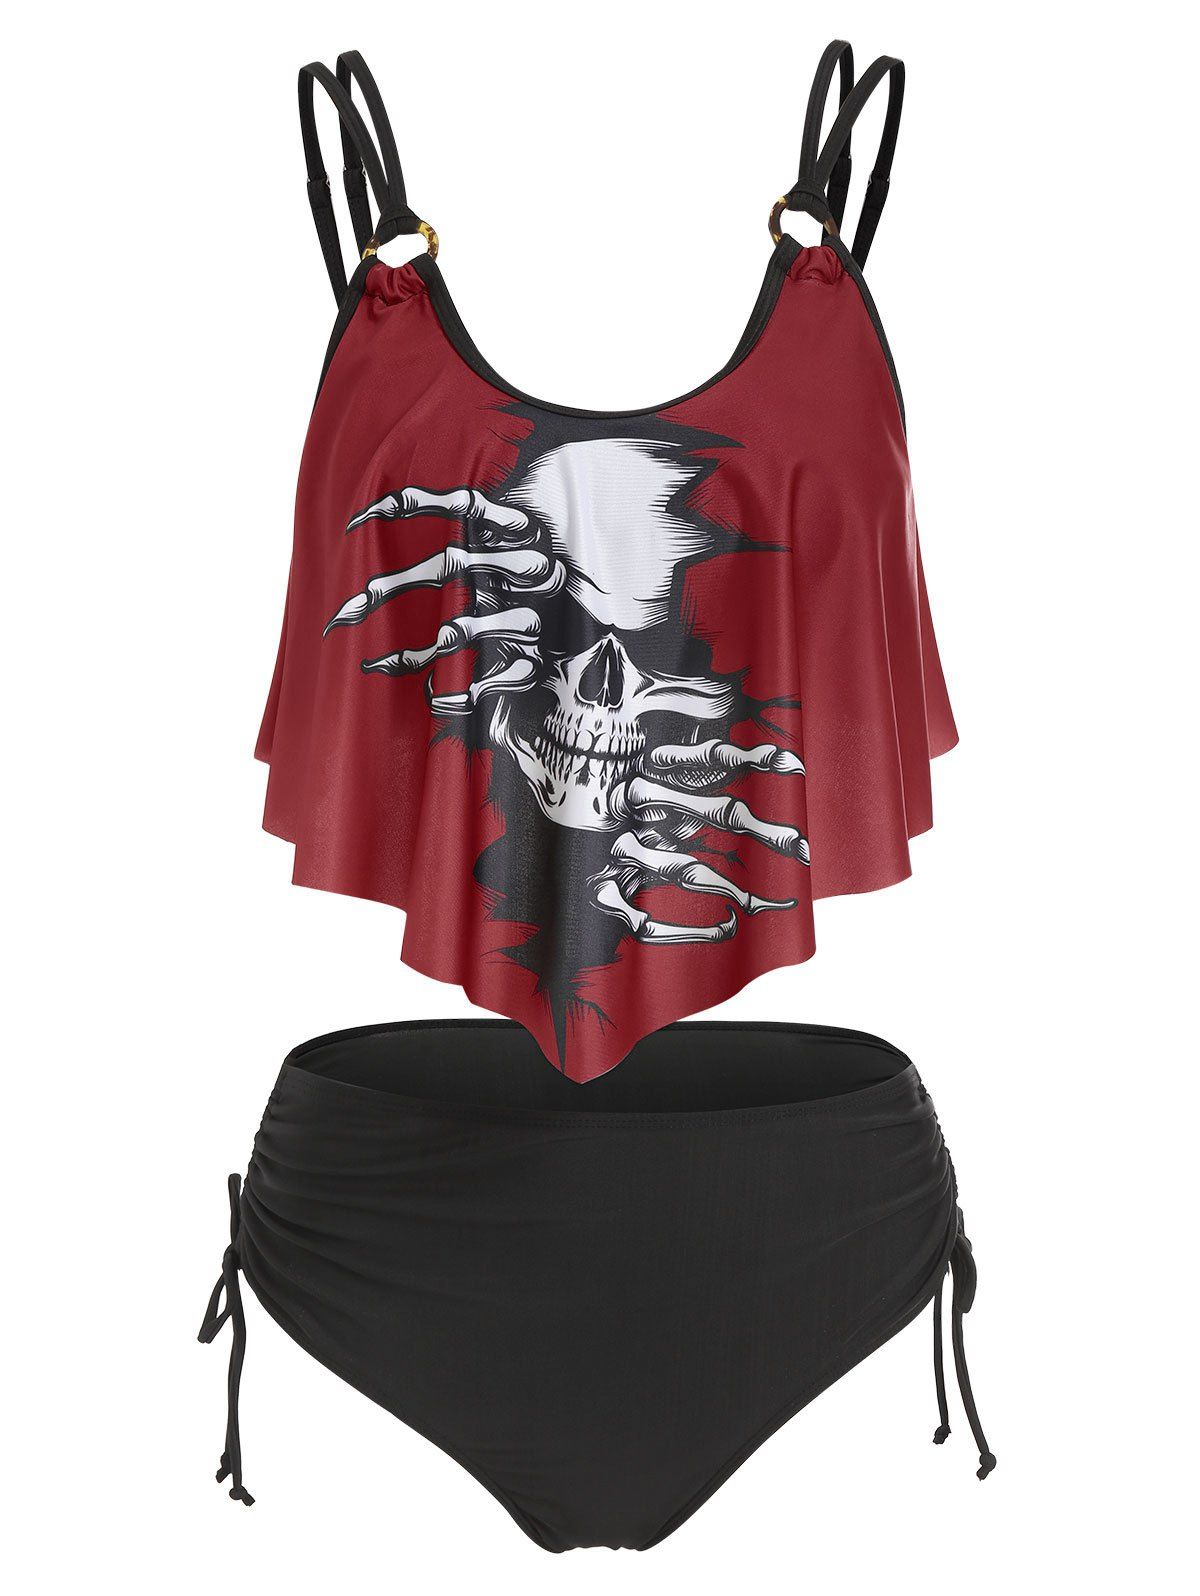 Tummy Control Tankini Swimwear Gothic Swimsuit Skeleton Skull Print Strappy Cinched Ruched Summer Beach Bathing Suit - BLACK XXXL